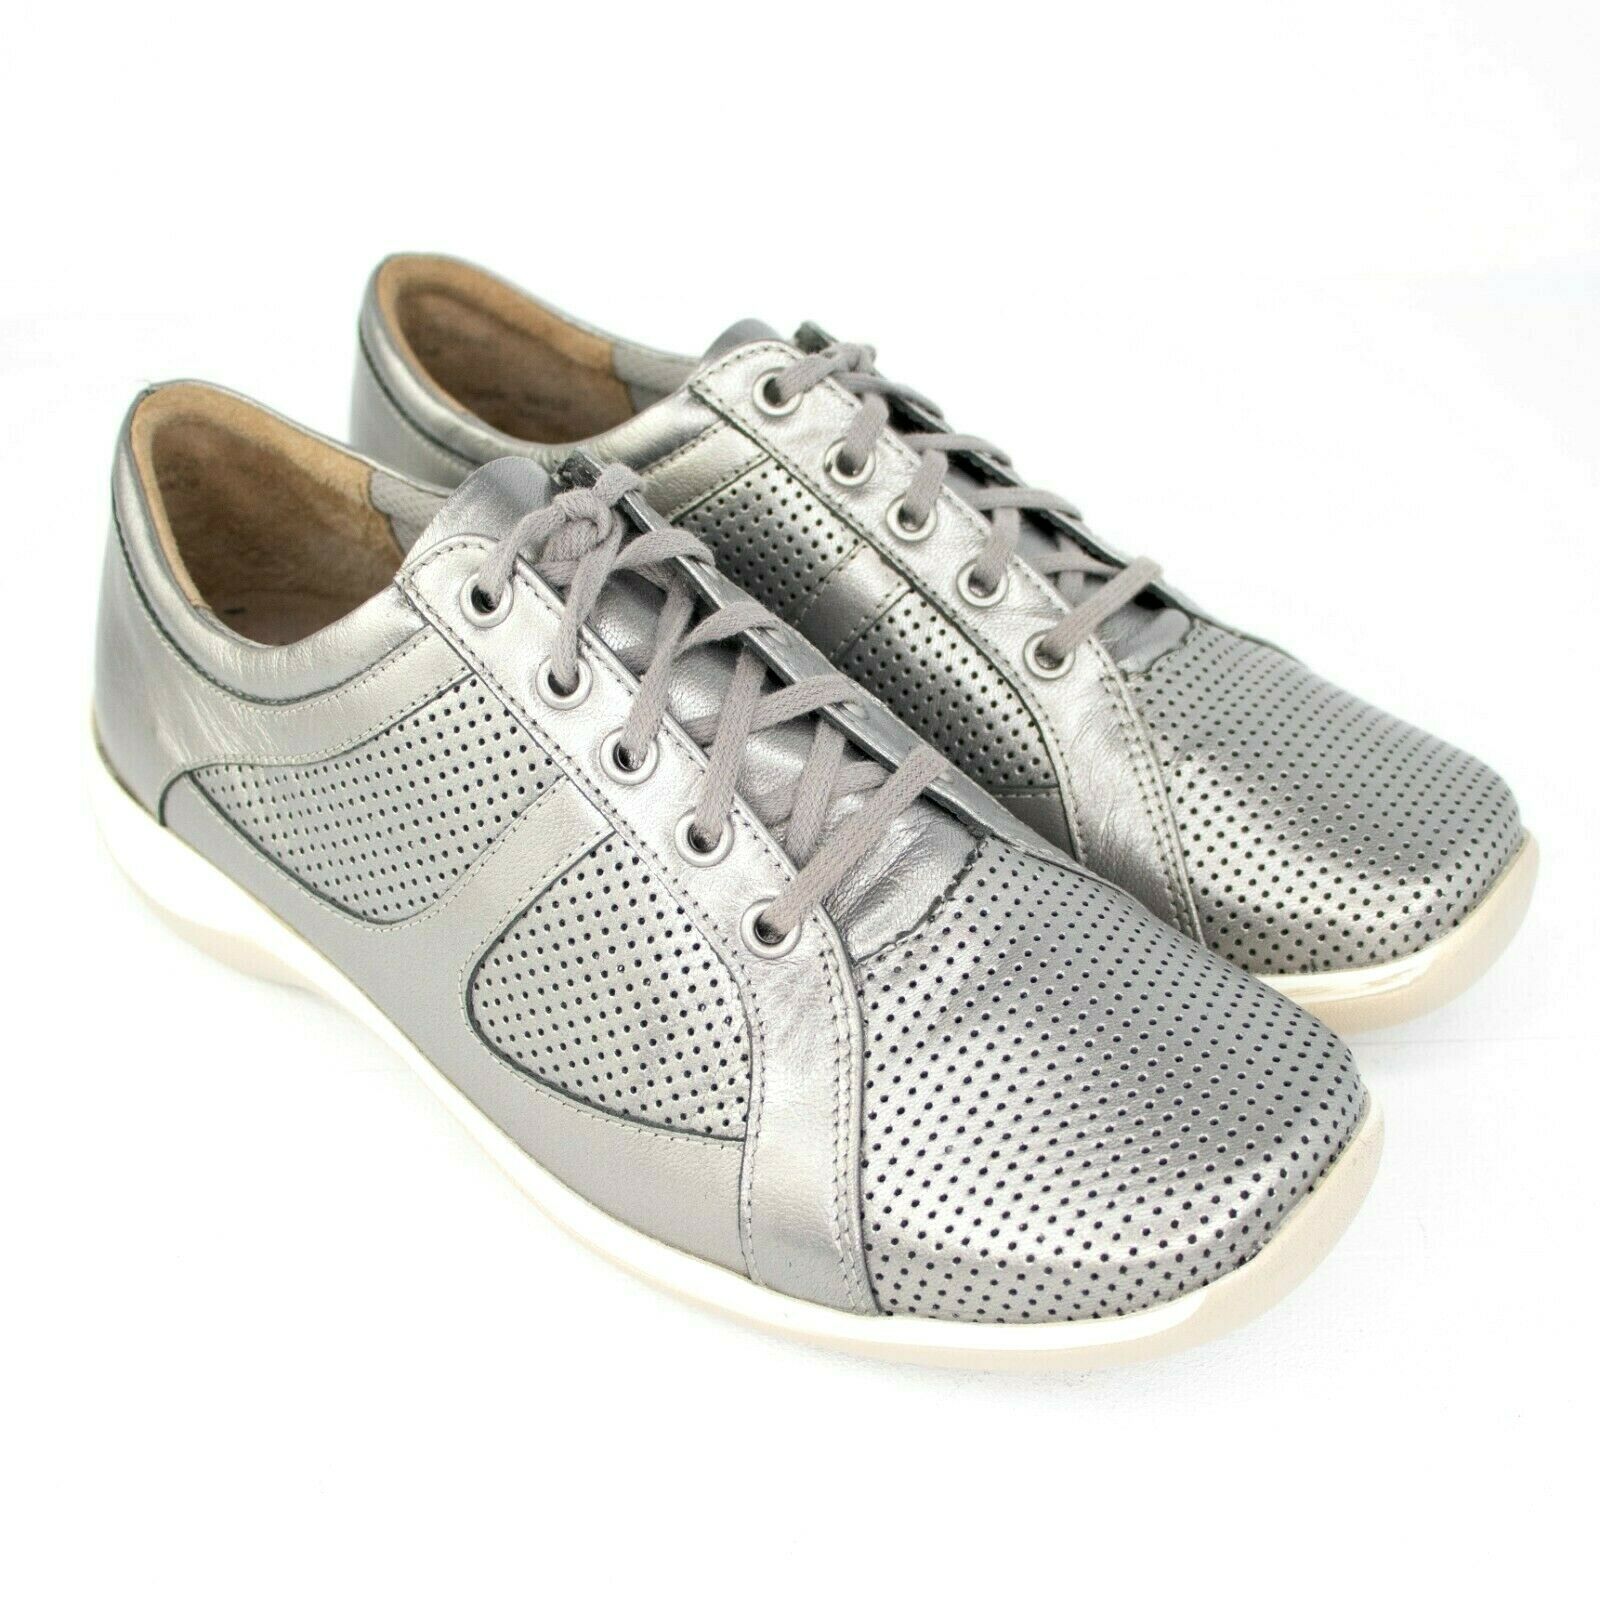 Ziera Jiggle Walking Silver Metallic Leather Lace Up Shoes SIZE 38.5